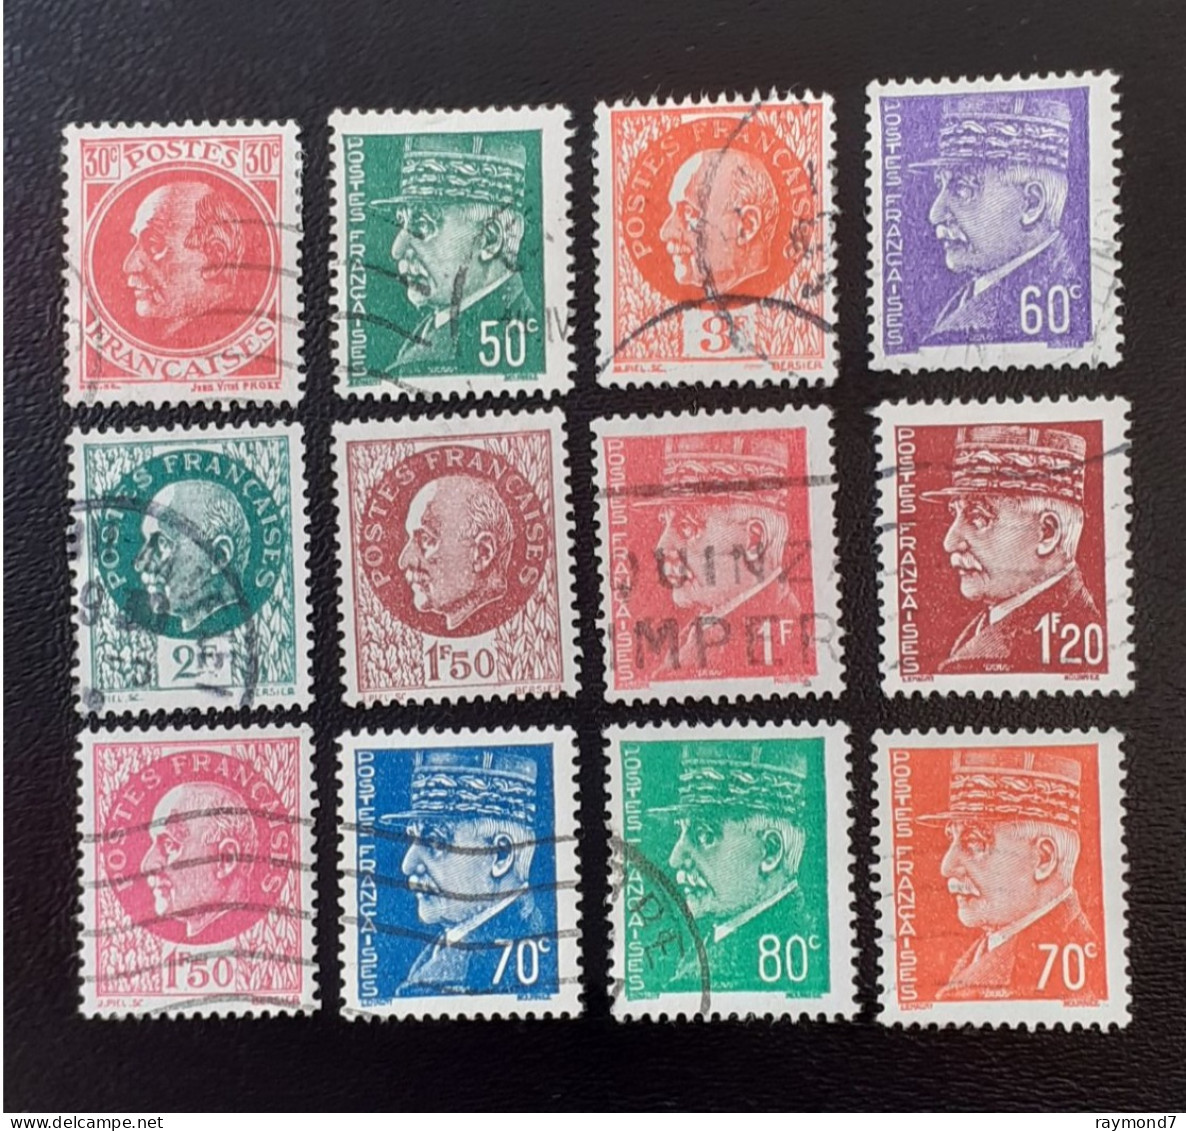 506-508-509-510-511-513-514-515-516-517-518-521  Lot Pétain - Used Stamps